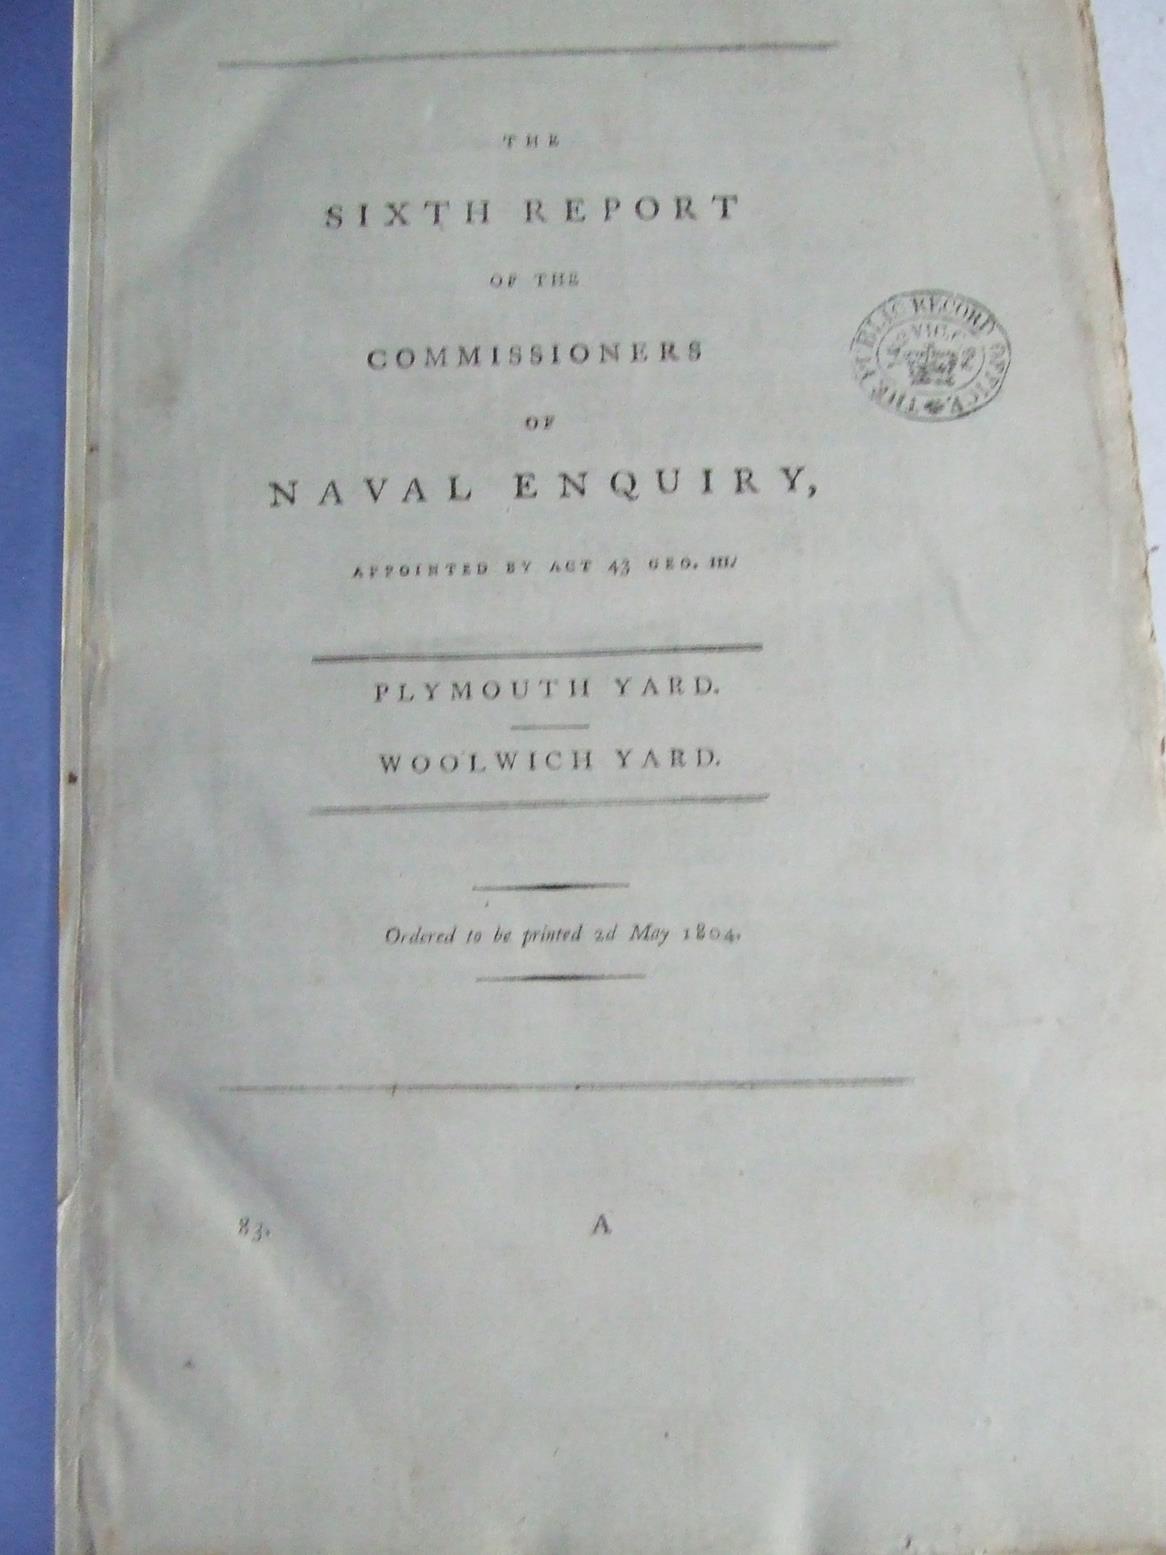 The Sixth Report of the Commissioners of Naval Enquiry